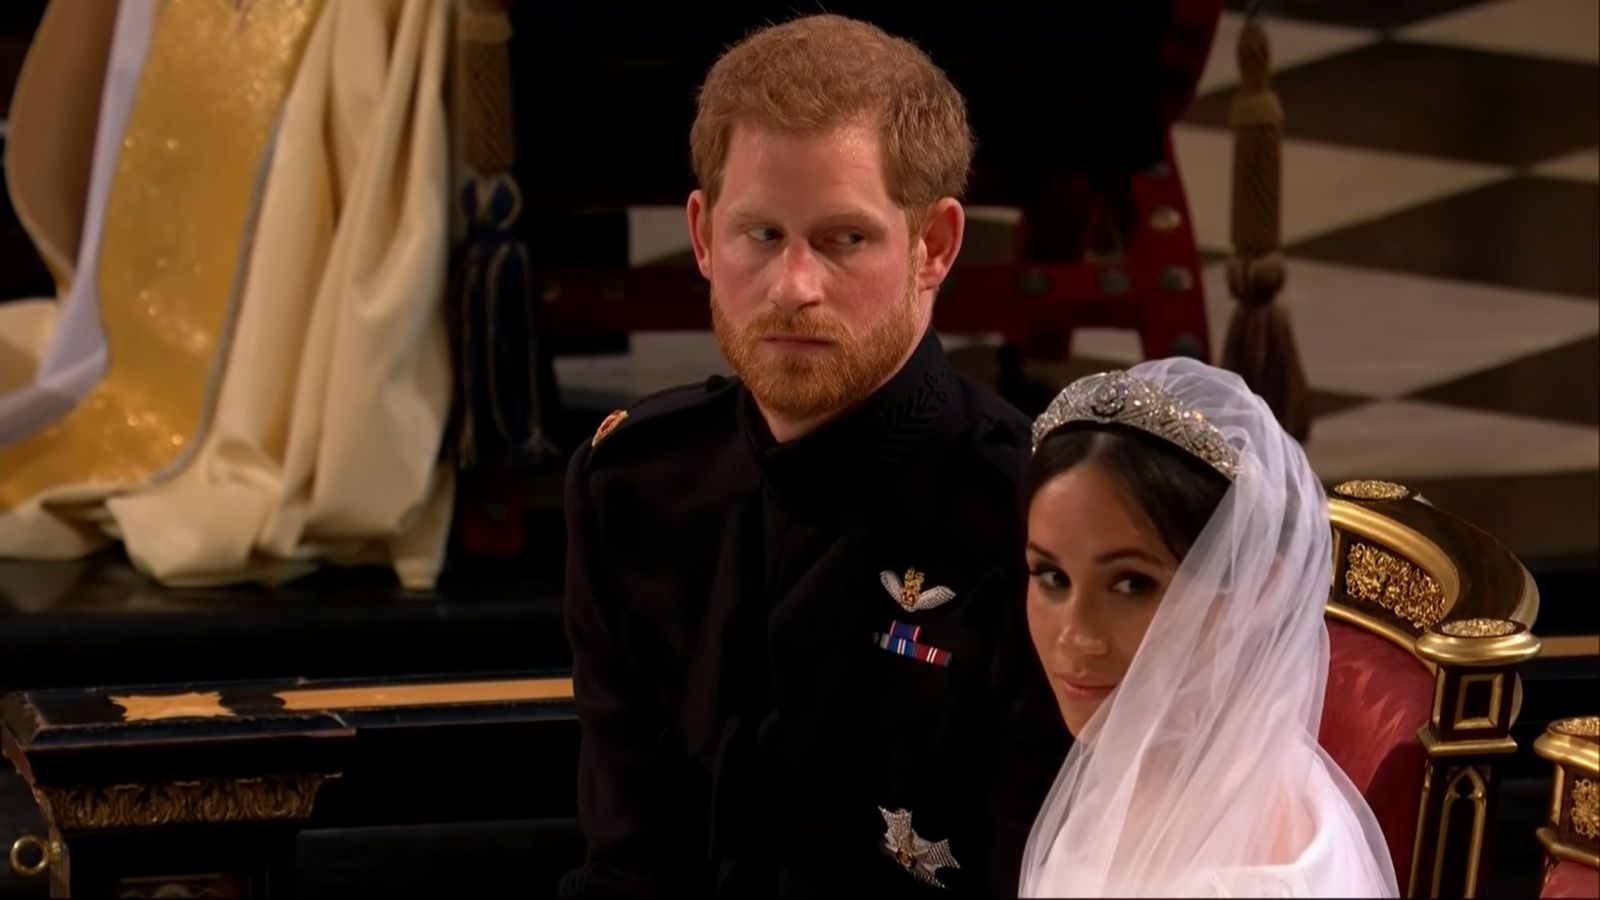 prince-harry-meghan-markle-renewing-their-vows-for-netflix-columnist-says-its-unlikely-because-sussex-pair-has-only-been-married-for-4-years